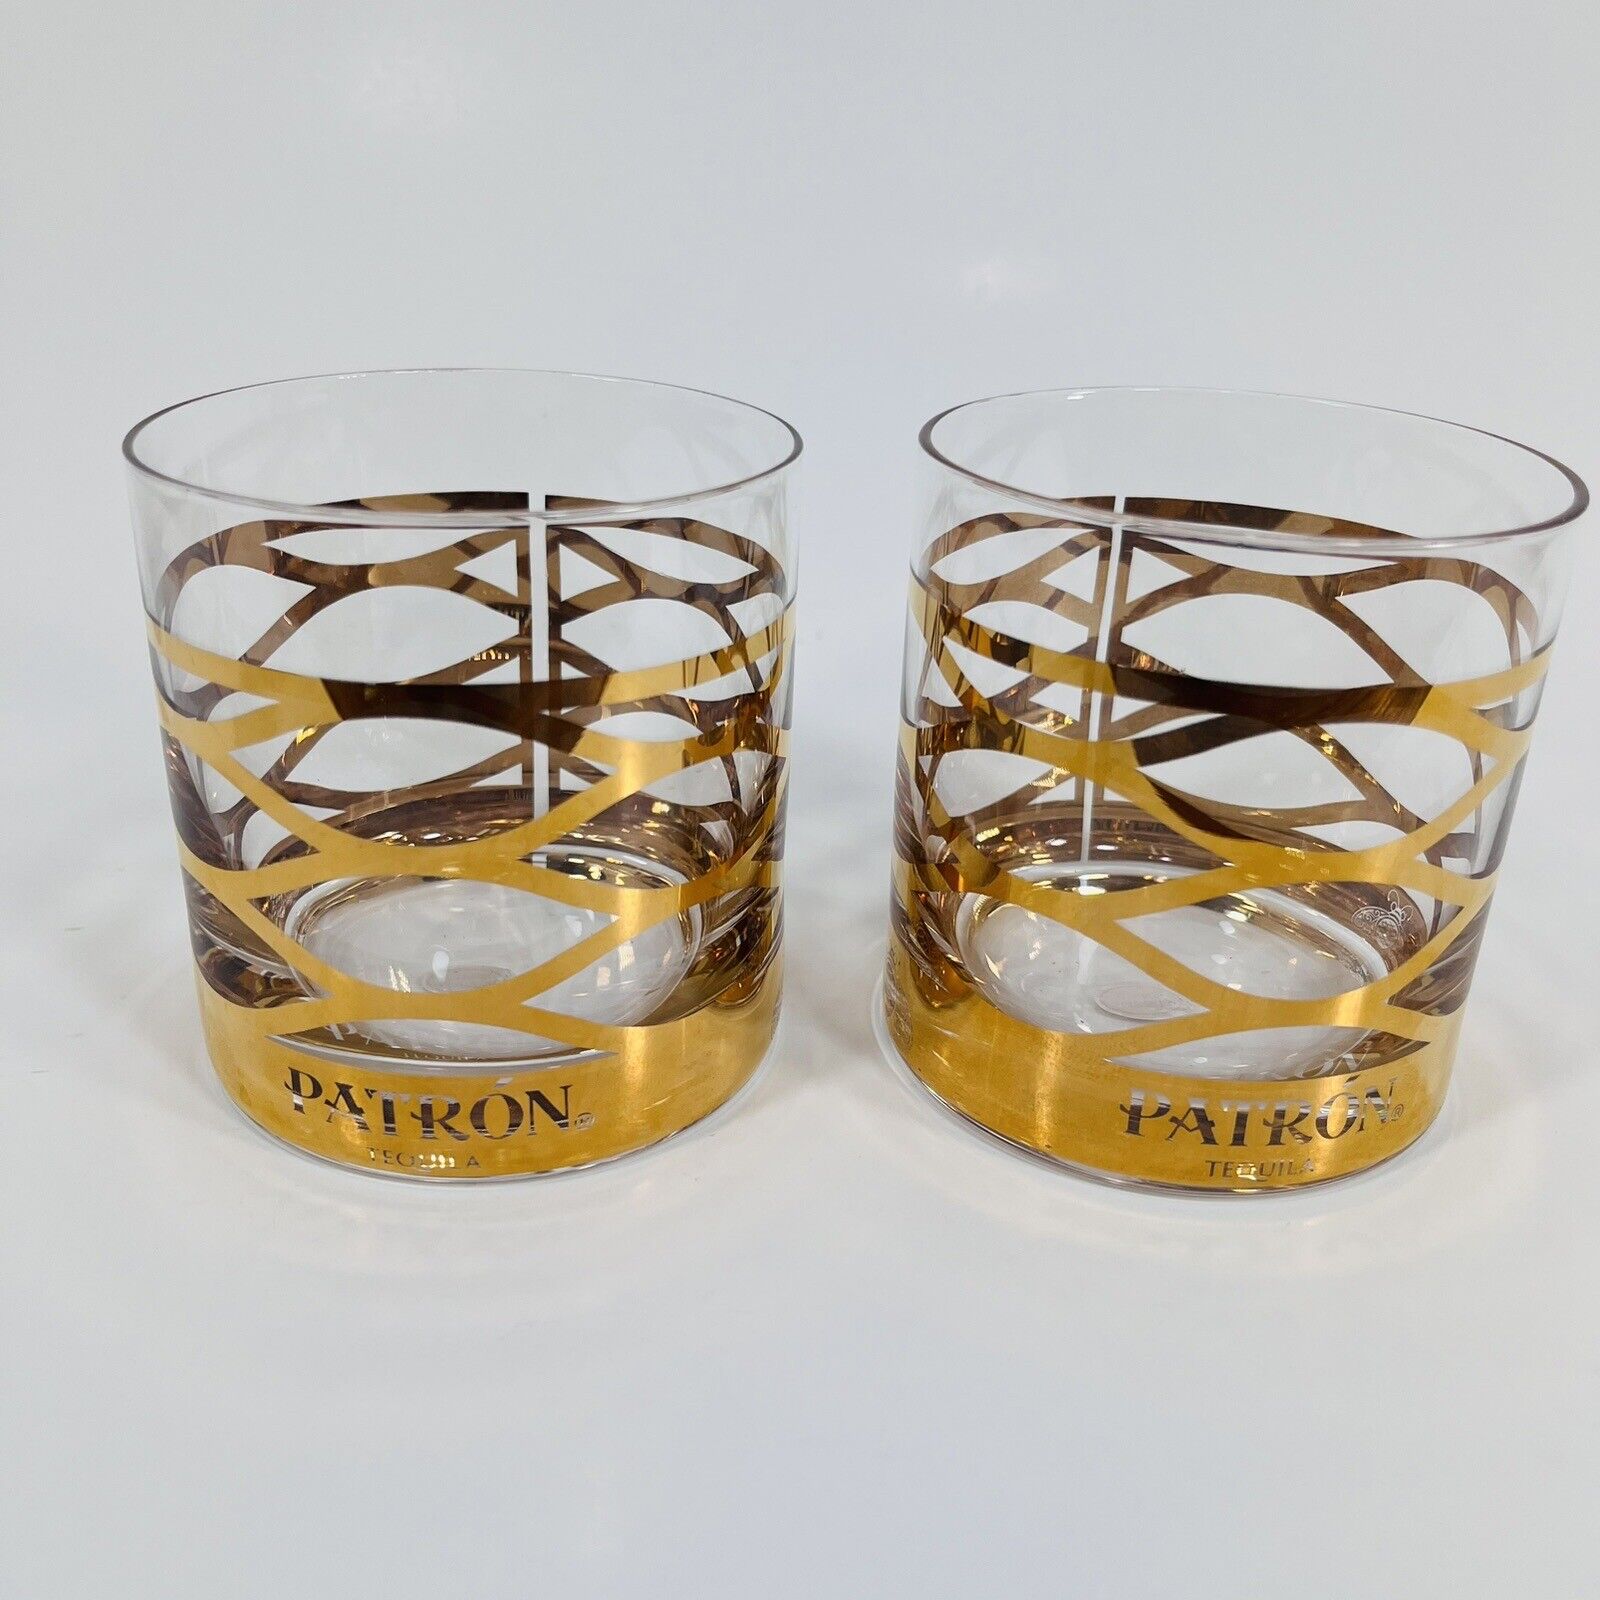 2 X Lowball Glasses - Patron Tequila Gold Trimmed - Pair